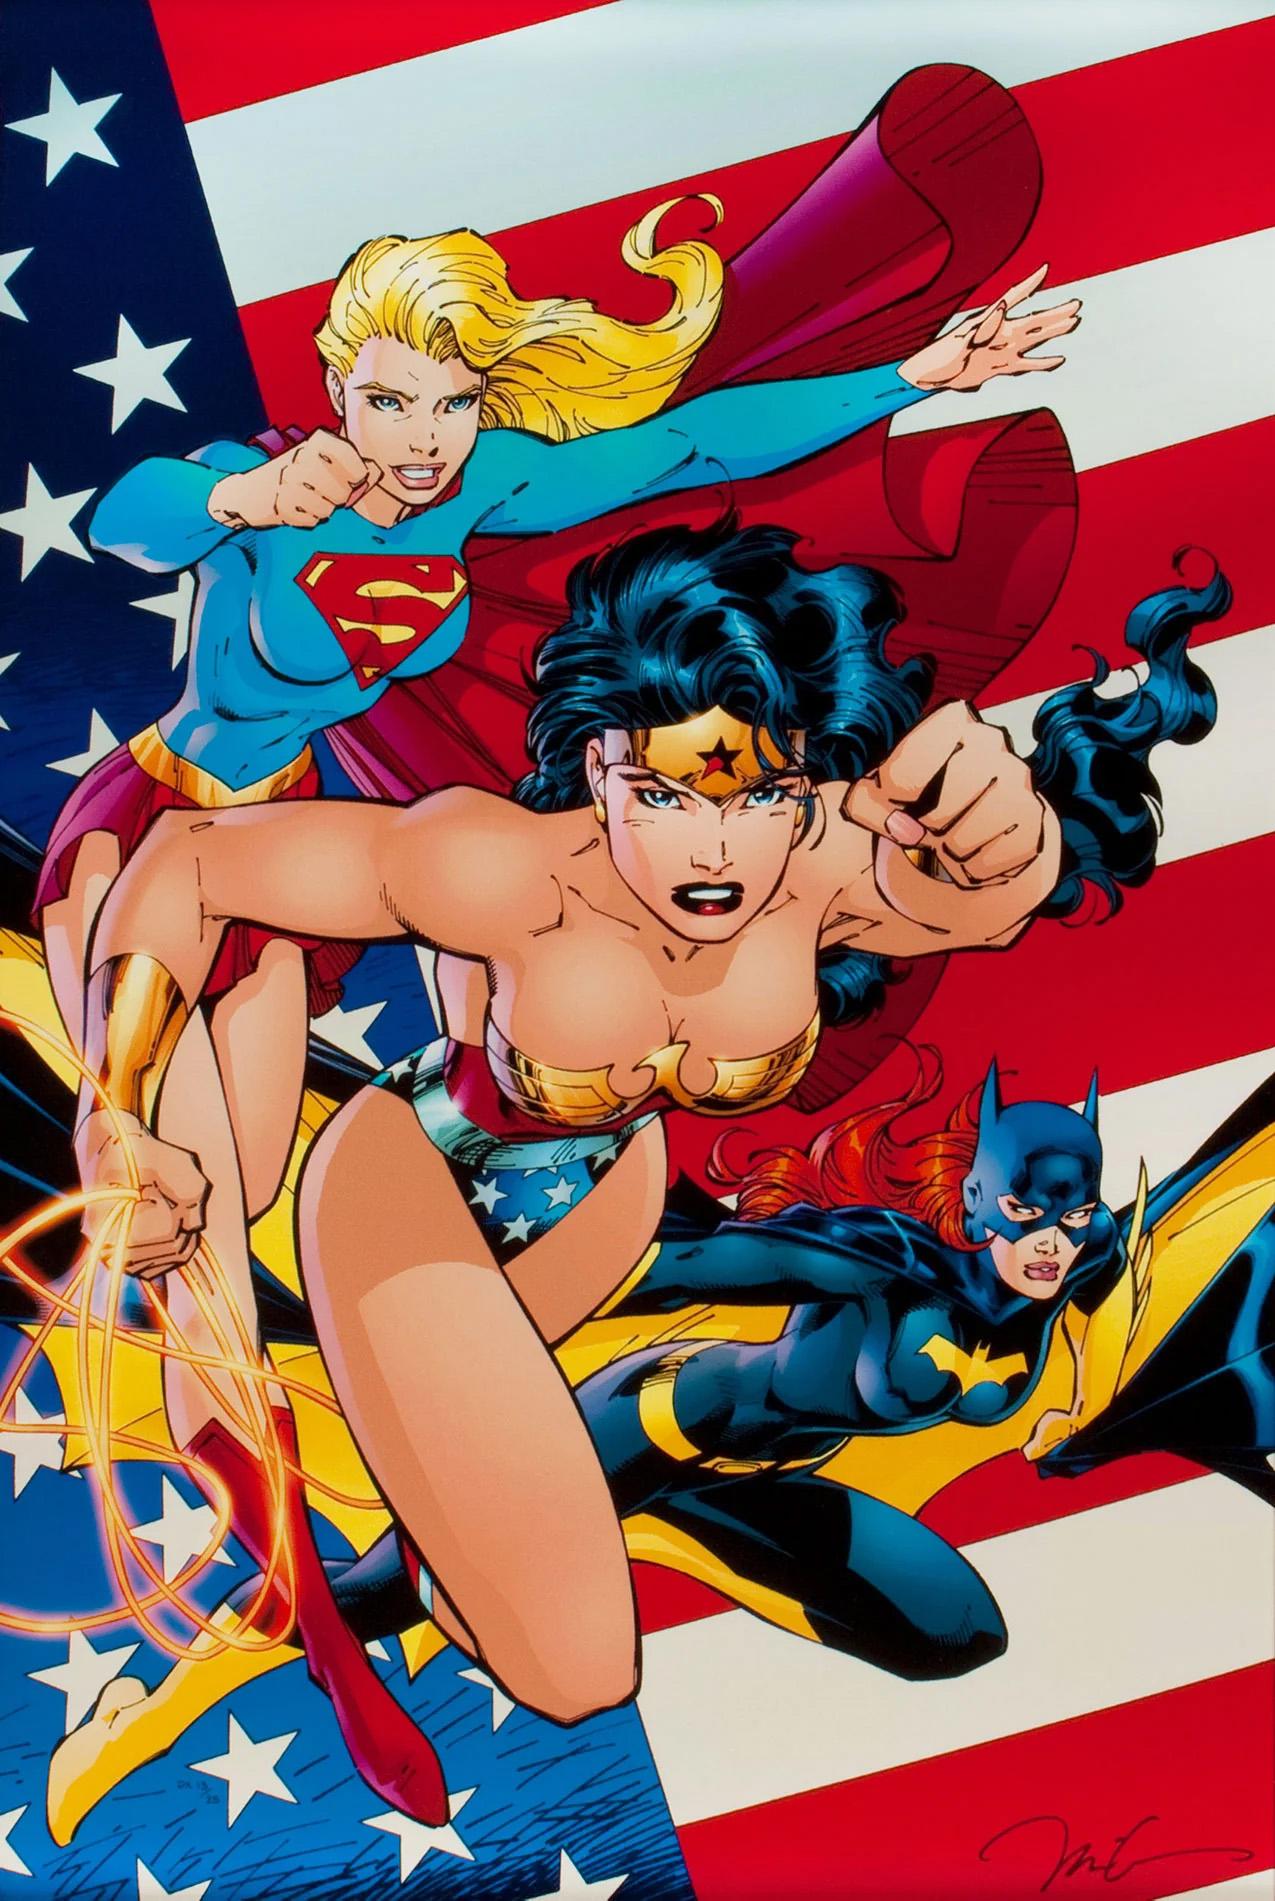 Heroines of the DC Universe signed by Jim Lee - Limited Run to 25